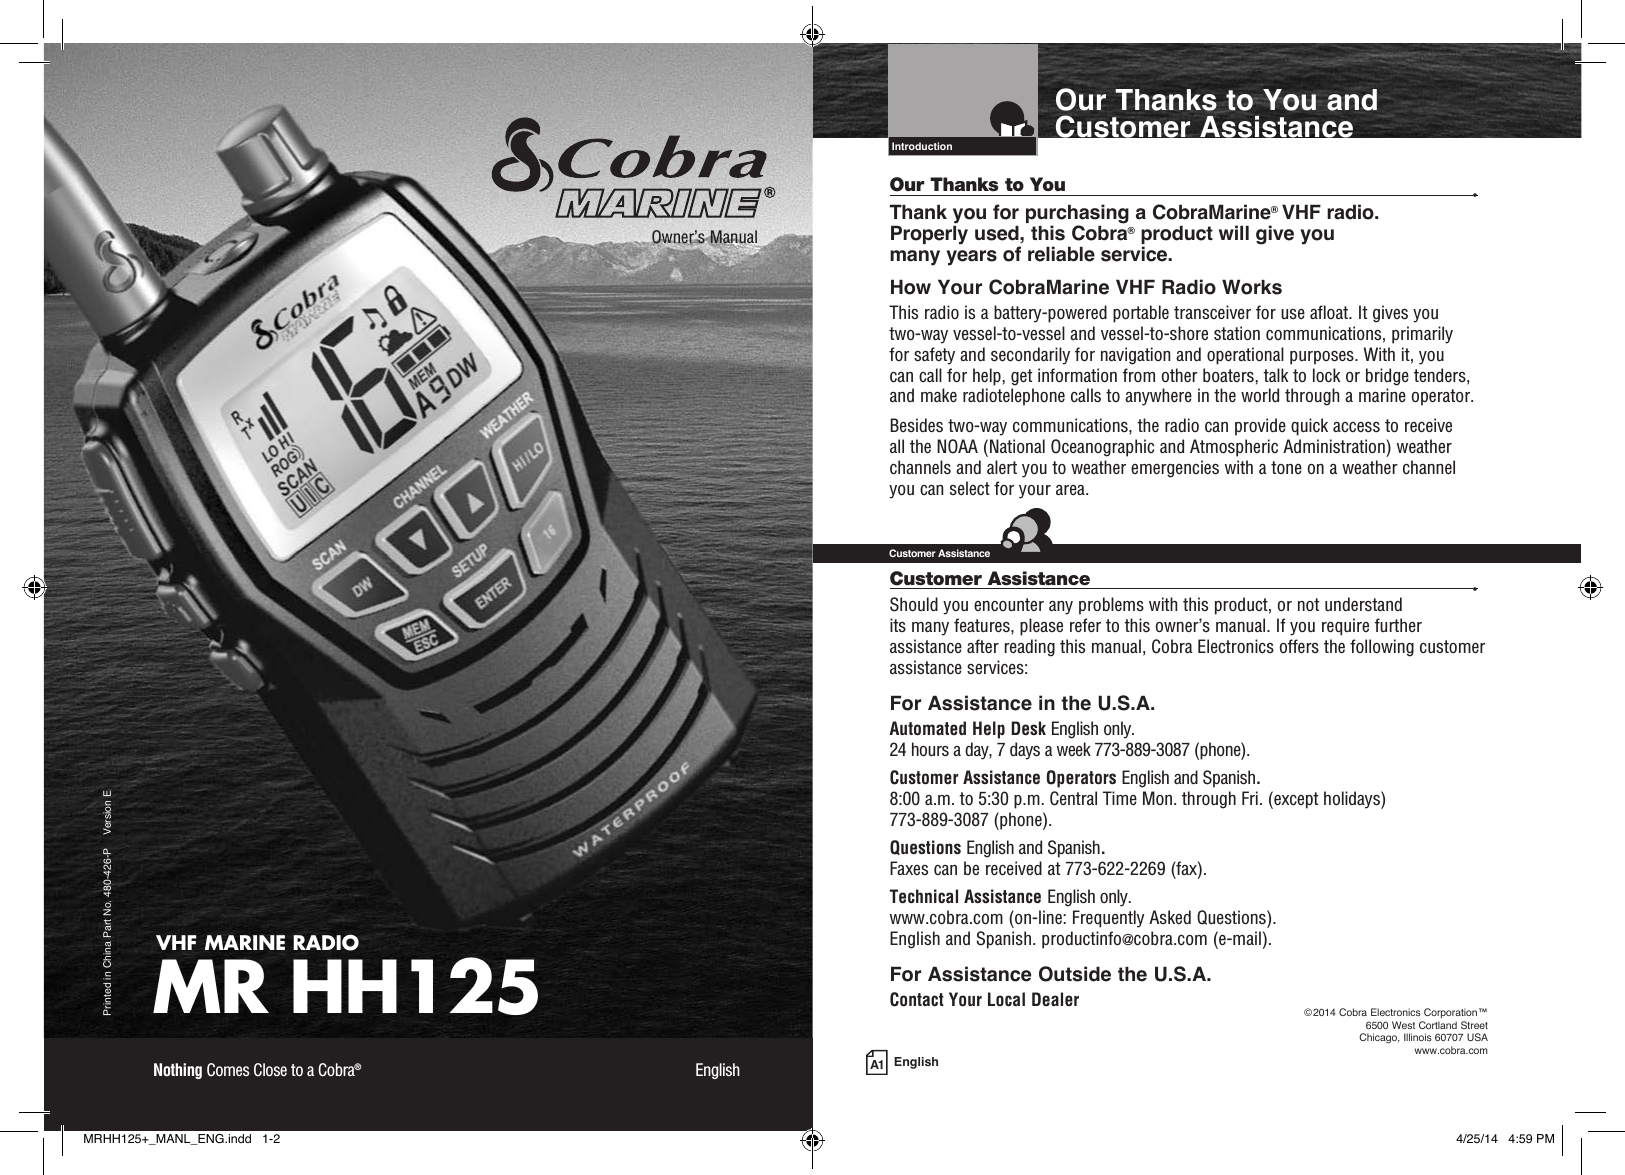 A1 EnglishOur Thanks to You and Customer AssistanceIntro Operation CustomerAssistanceWarrantyNoticeMain IconsSecondary IconsCaution WarningInstallation CustomerAssistanceIntroductionVHF MARINE RADIOMR HH125Printed in China Part No. 480-426-P    Version EOwner’s ManualNothing Comes Close to a Cobra®  EnglishOur Thanks to You  •Thank you for purchasing a CobraMarine® VHF radio.  Properly used, this Cobra® product will give you  many years of reliable service.How Your CobraMarine VHF Radio WorksThis radio is a battery-powered portable transceiver for use afloat. It gives you  two-way vessel-to-vessel and vessel-to-shore station communications, primarily  for safety and secondarily for navigation and operational purposes. With it, you  can call for help, get information from other boaters, talk to lock or bridge tenders, and make radiotelephone calls to anywhere in the world through a marine operator.Besides two-way communications, the radio can provide quick access to receive  all the NOAA (National Oceanographic and Atmospheric Administration) weather channels and alert you to weather emergencies with a tone on a weather channel you can select for your area.Customer Assistance  •Should you encounter any problems with this product, or not understand  its many features, please refer to this owner’s manual. If you require further assistance after reading this manual, Cobra Electronics offers the following customer assistance services:For Assistance in the U.S.A. Automated Help Desk English only. 24 hours a day, 7 days a week 773-889-3087 (phone).Customer Assistance Operators English and Spanish. 8:00 a.m. to 5:30 p.m. Central Time Mon. through Fri. (except holidays)  773-889-3087 (phone).Questions English and Spanish. Faxes can be received at 773-622-2269 (fax).Technical Assistance English only. www.cobra.com (on-line: Frequently Asked Questions). English and Spanish. productinfo@cobra.com (e-mail).For Assistance Outside the U.S.A.Contact Your Local DealerIntro Operation CustomerAssistanceWarrantyNoticeMain IconsSecondary IconsCaution WarningInstallation CustomerAssistanceCustomer Assistance©2014 Cobra Electronics Corporation™  6500 West Cortland Street Chicago, Illinois 60707 USAwww.cobra.comMRHH125+_MANL_ENG.indd   1-2 4/25/14   4:59 PM